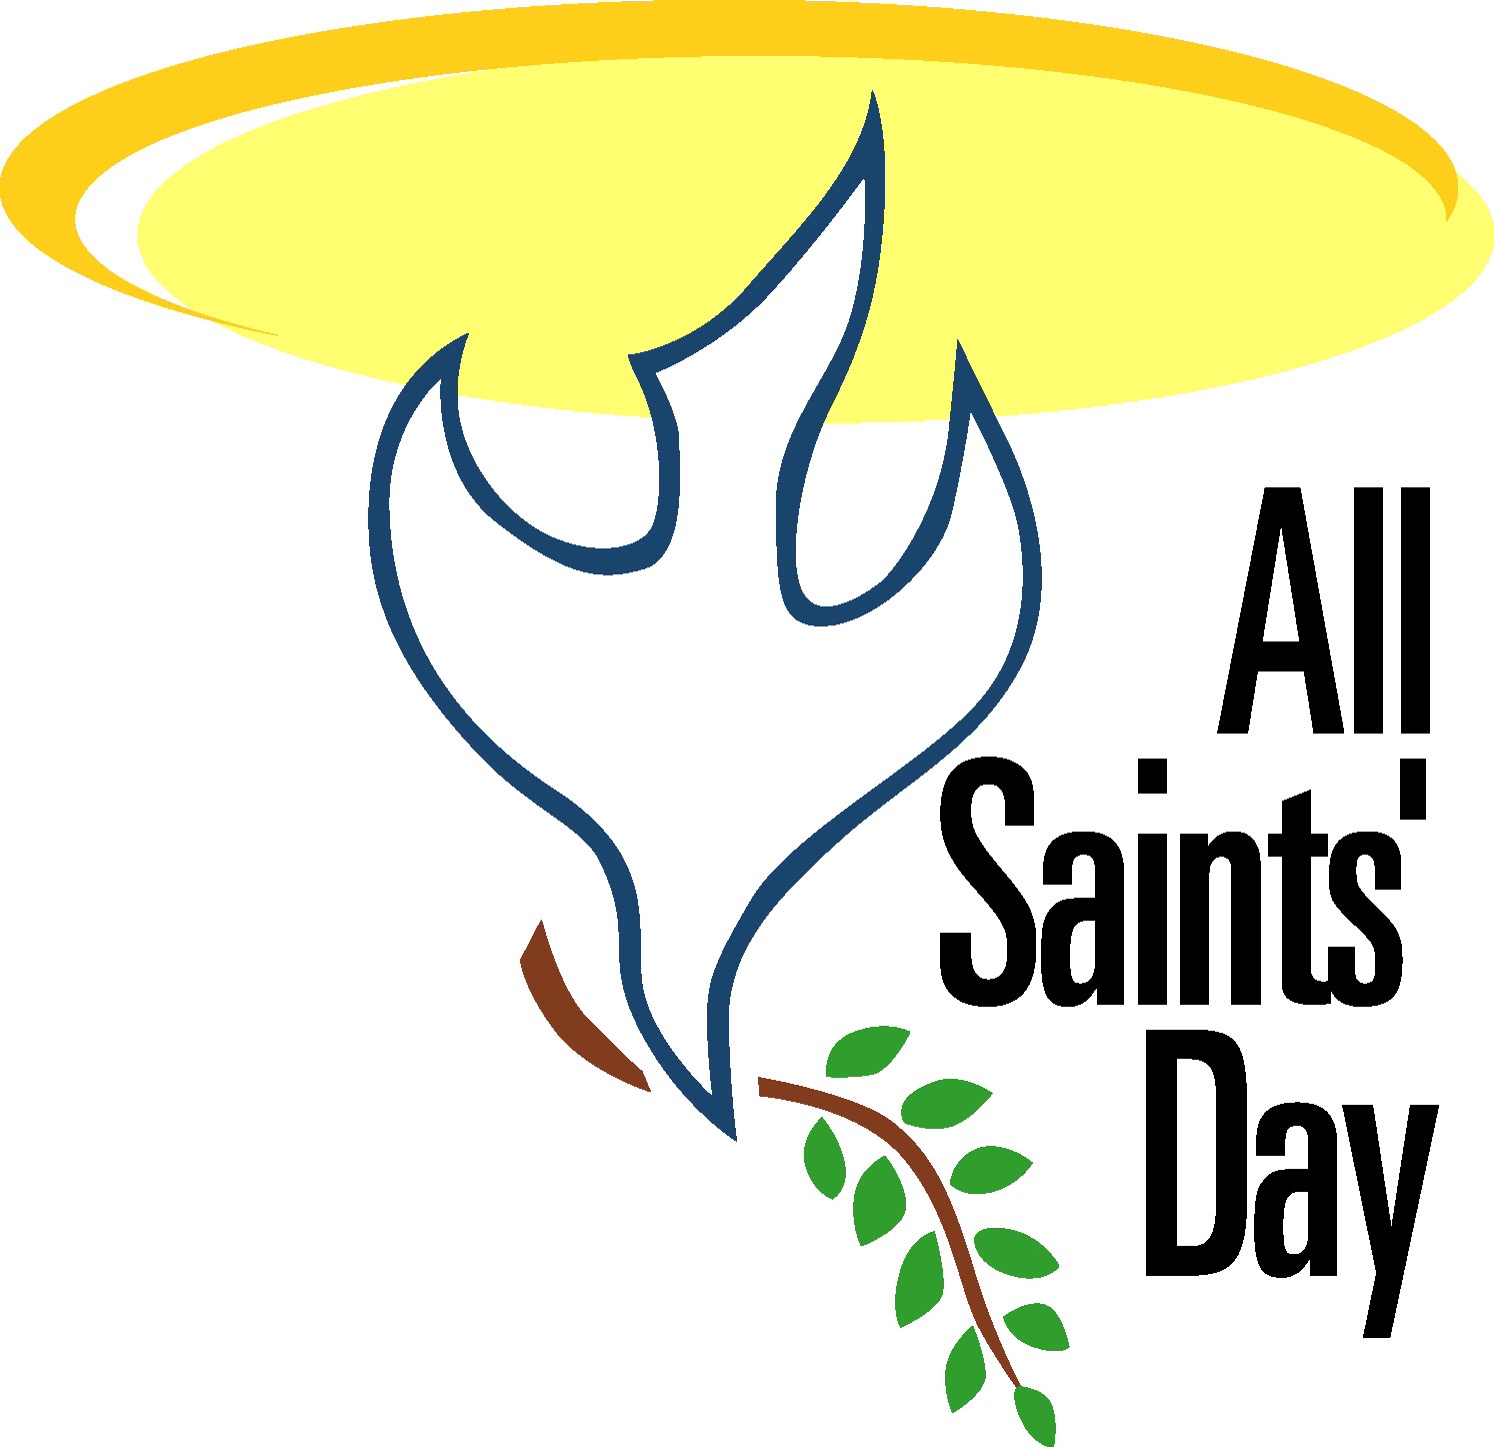 Welcome! All Saints Day Hospitality Service - Spirit of Peace